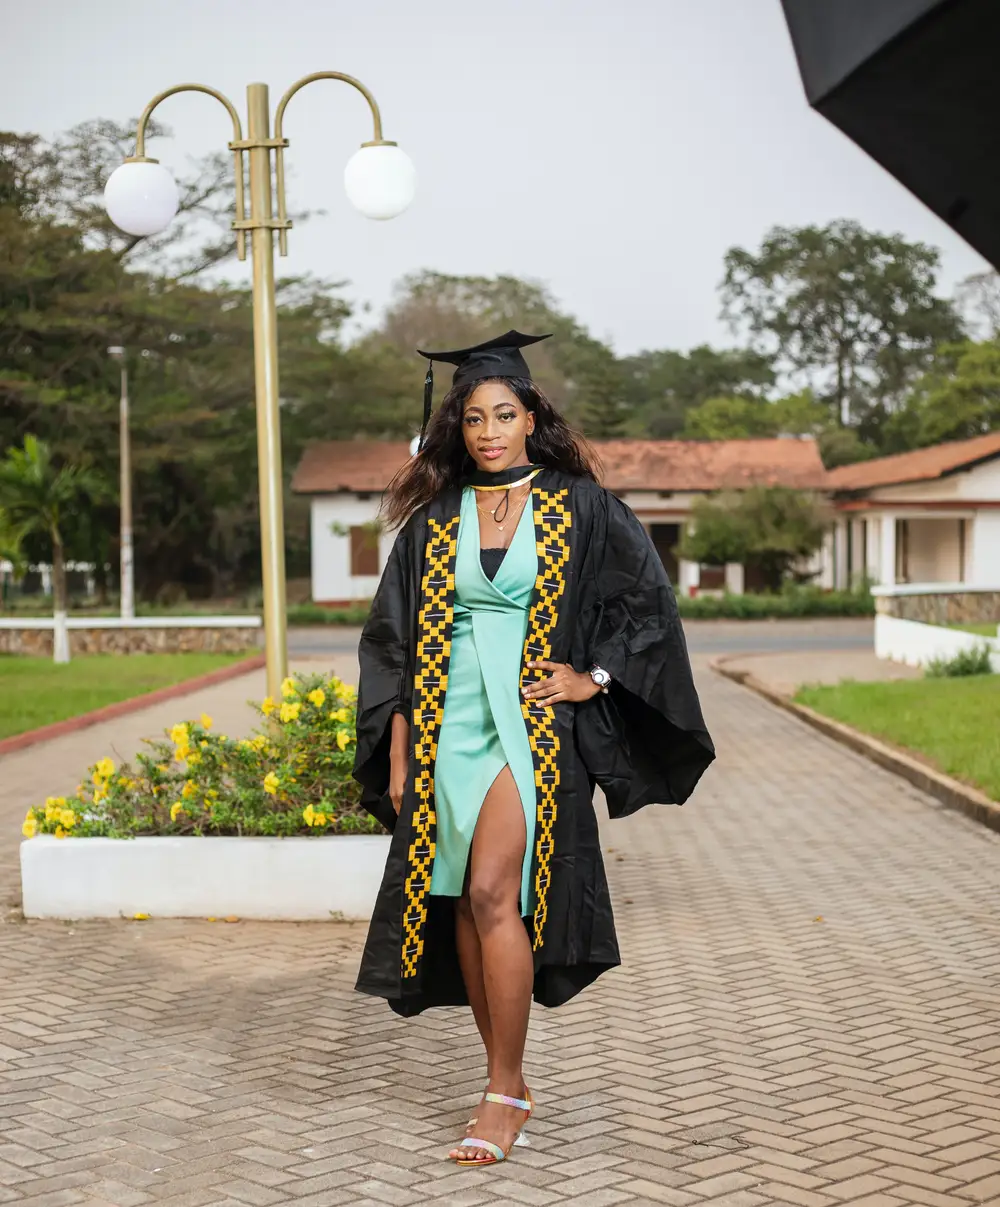 woman posing in graduation gown